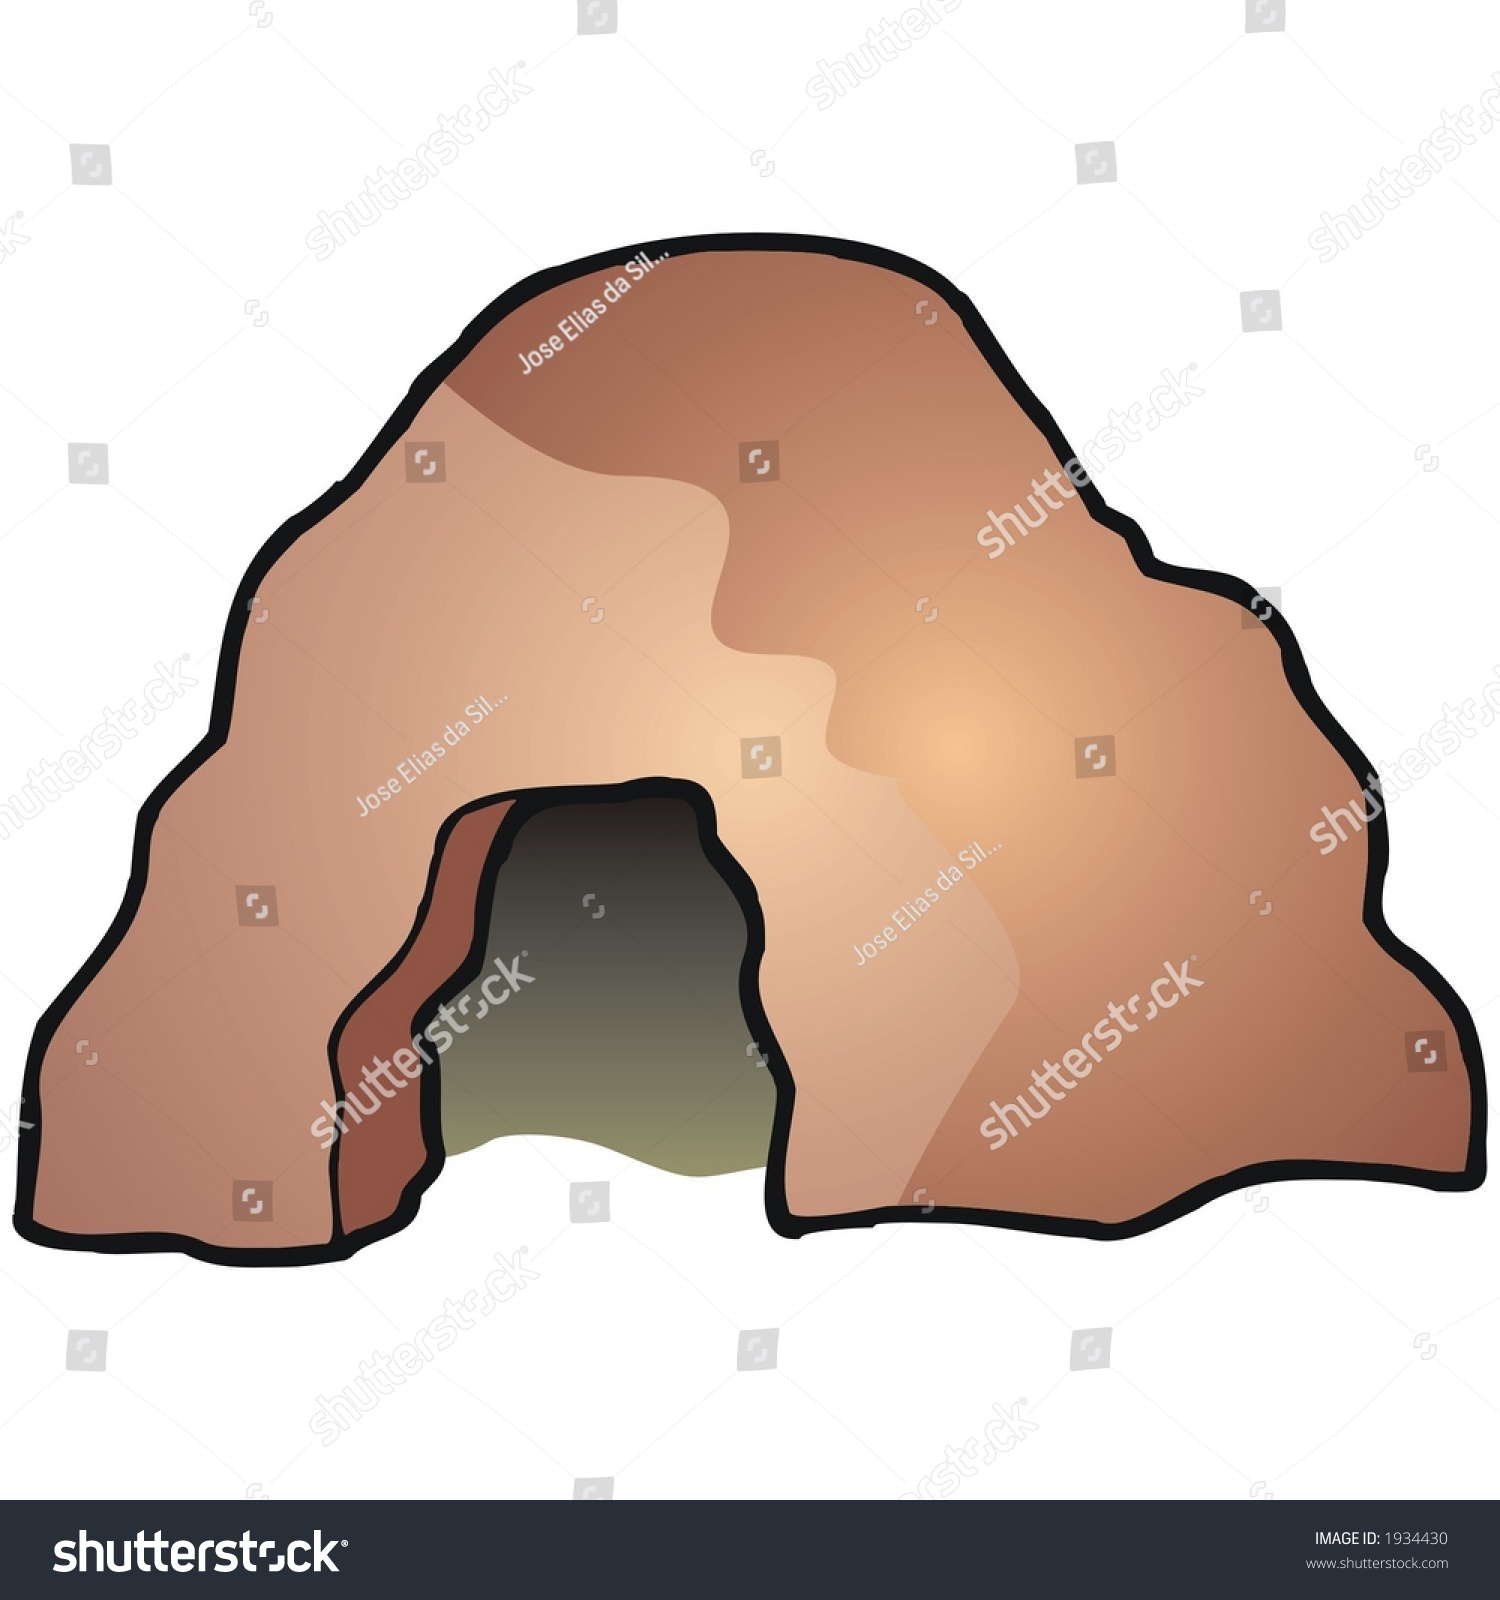 Cave Stock Vector (Royalty Free) 1934430 - Shutterstock